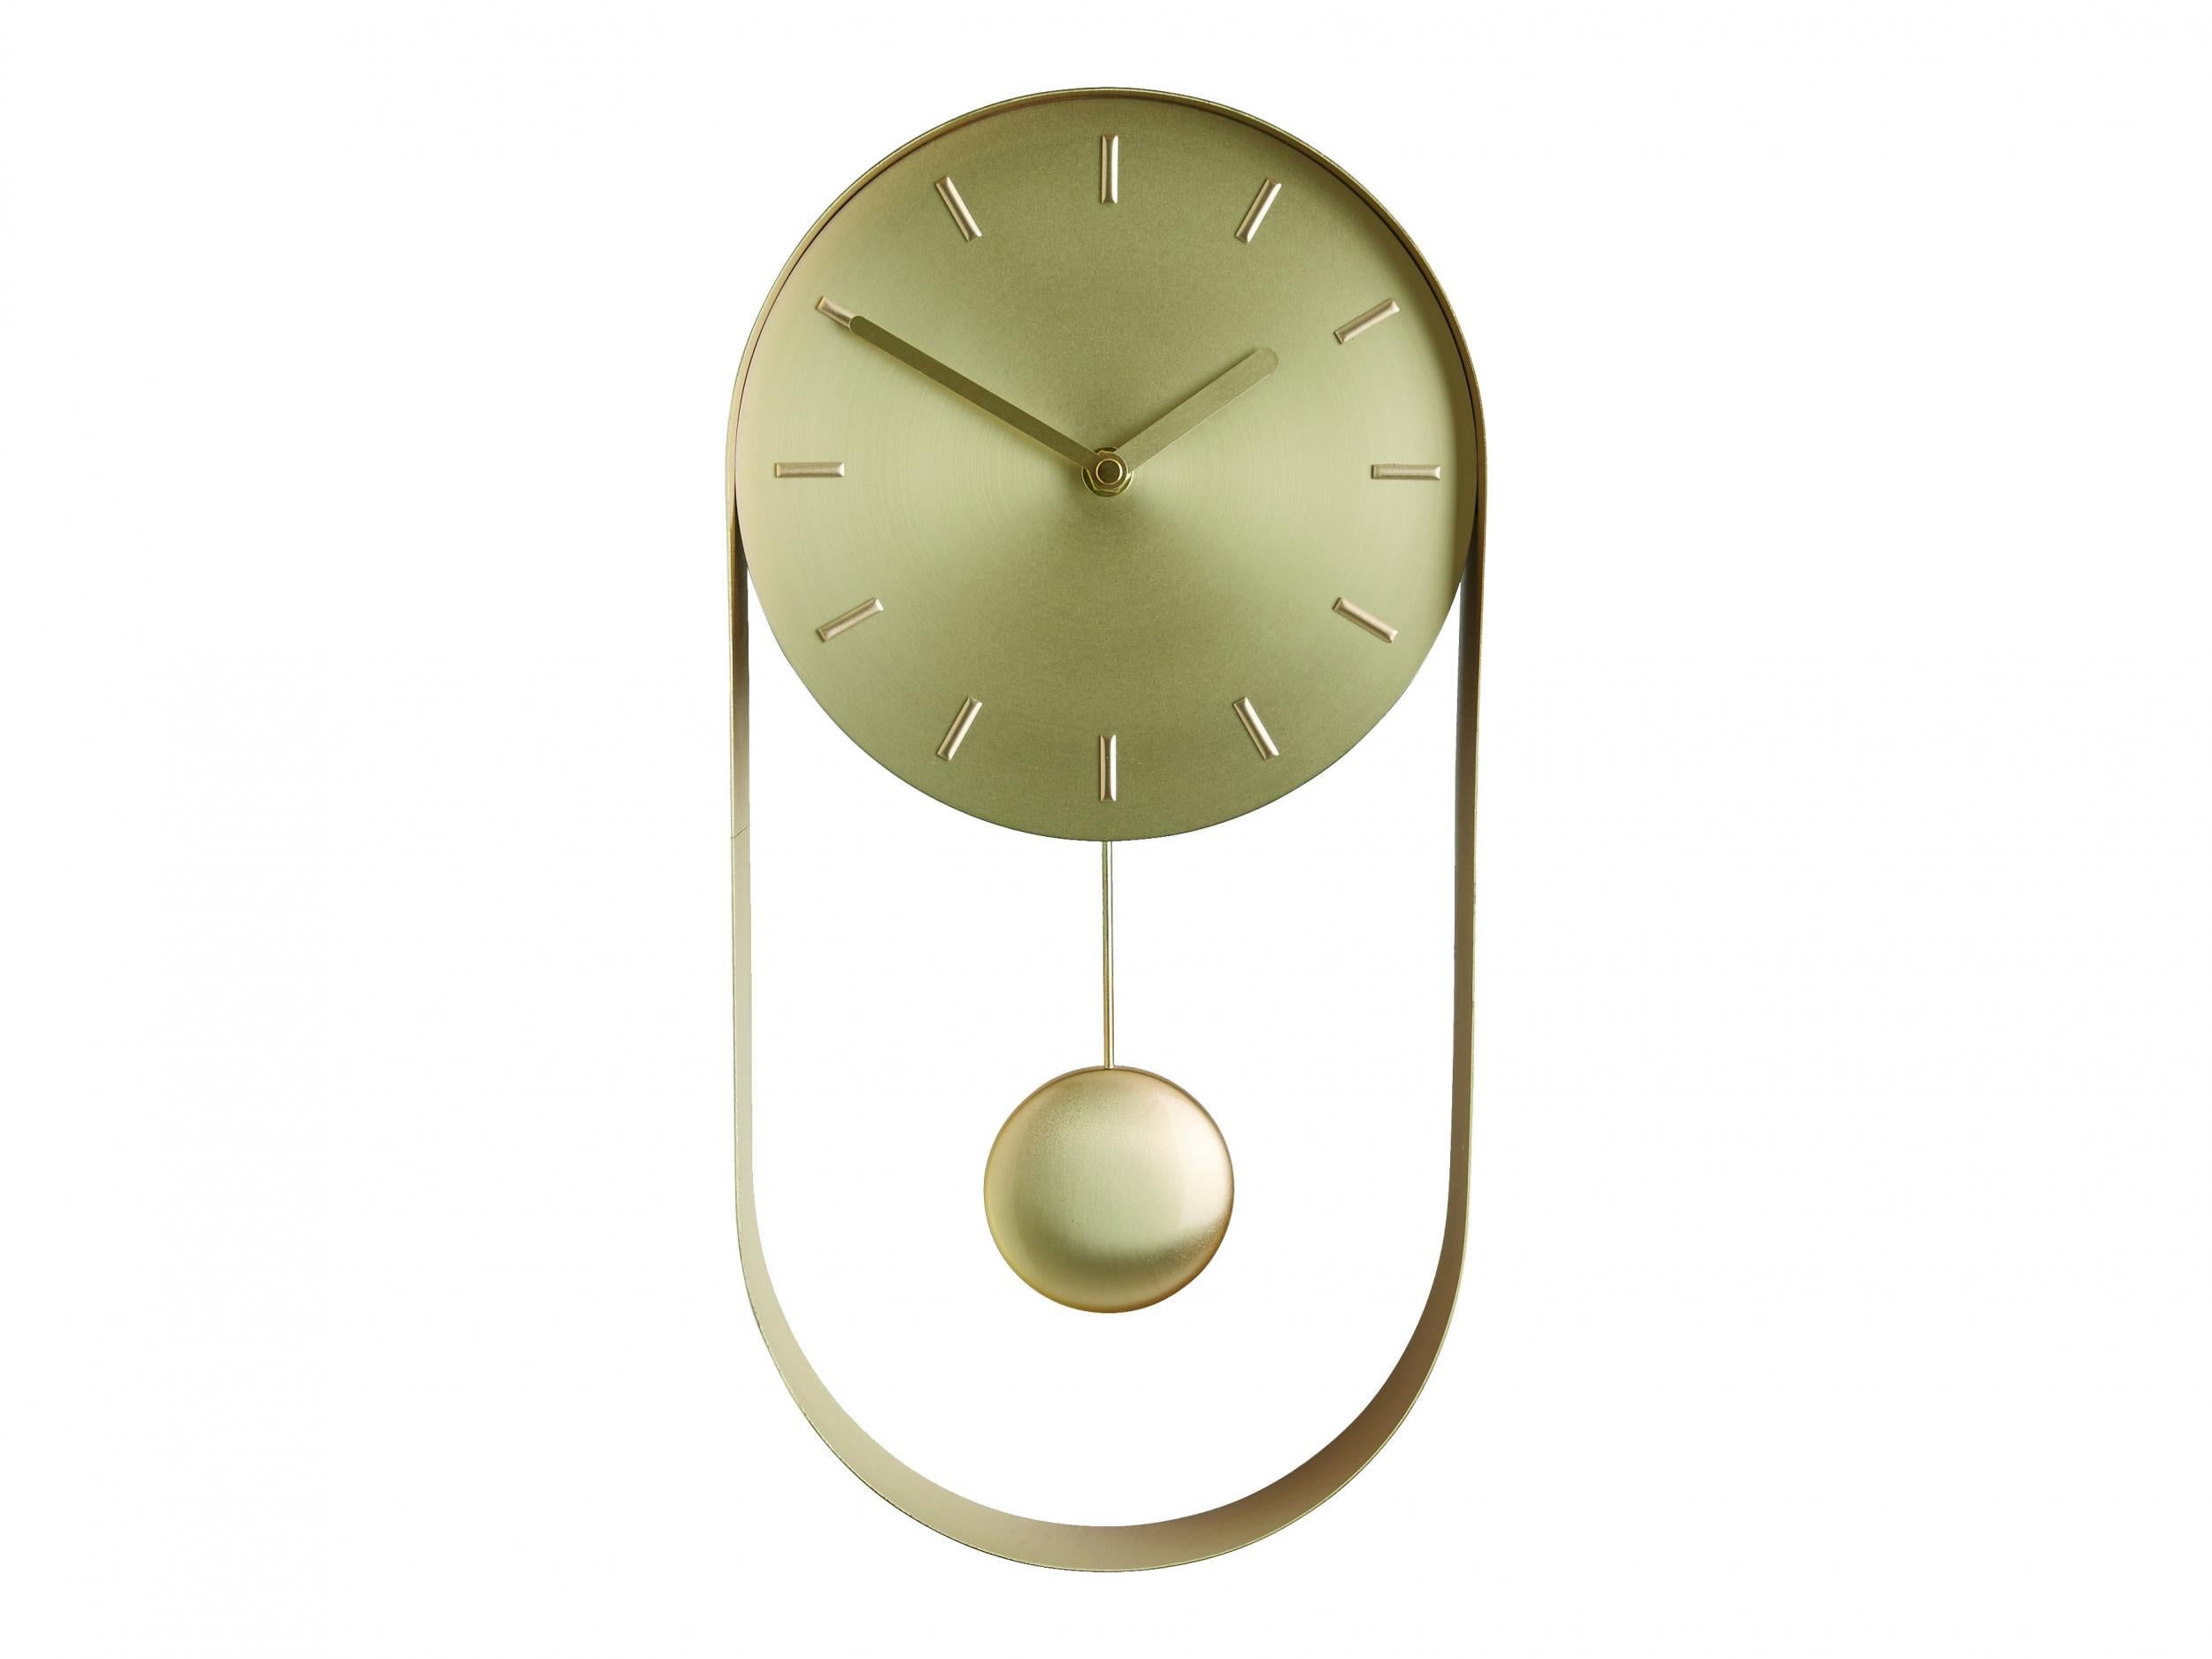 Non Ticking Battery Operated Clocks Art Decoration for School Bedroom Office Kitchen Living Room Green Polka Dot Qilmy Round Clock Silent Wall Clock